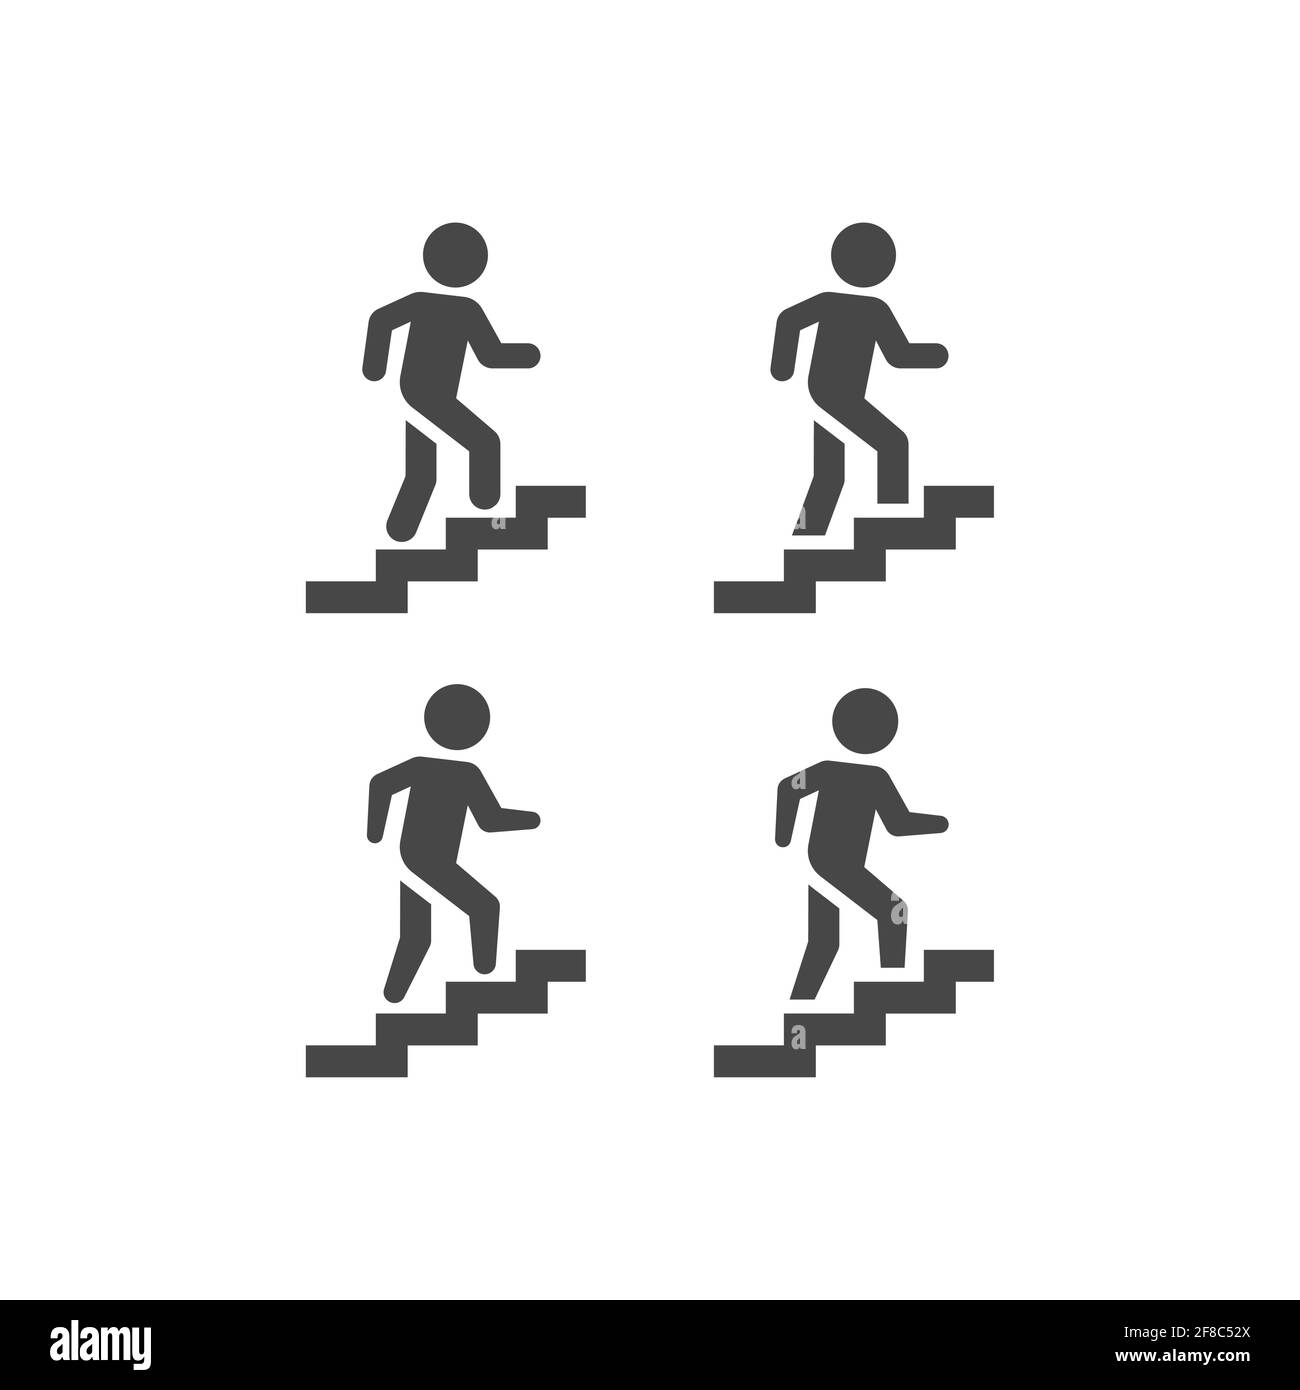 Stairs or stairway black vector sign. Man climbing up staircase symbol. Stock Vector